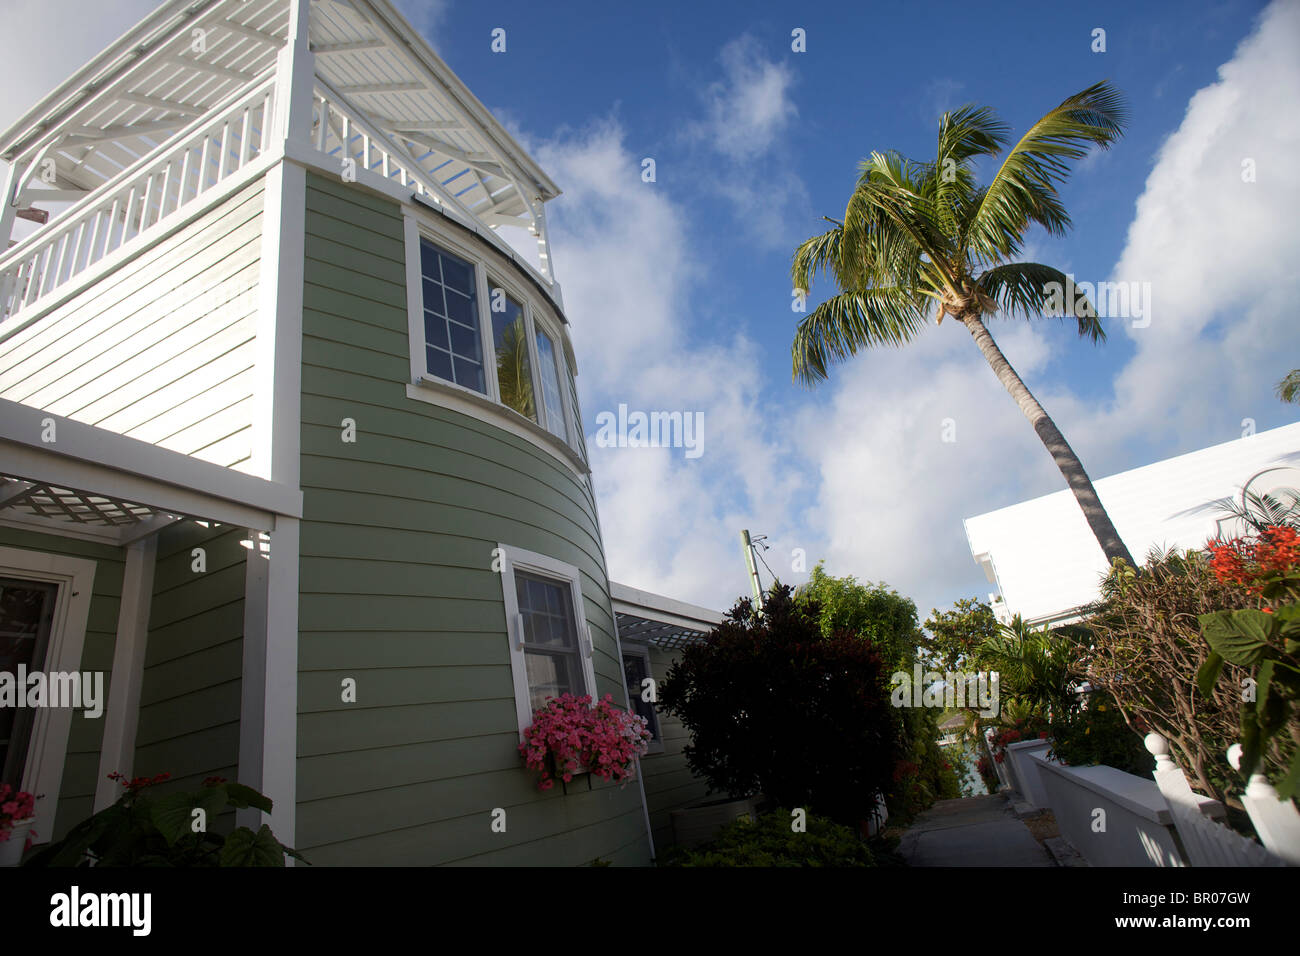 A typical wooden house in Hope Town, Elbow Cay. Stock Photo